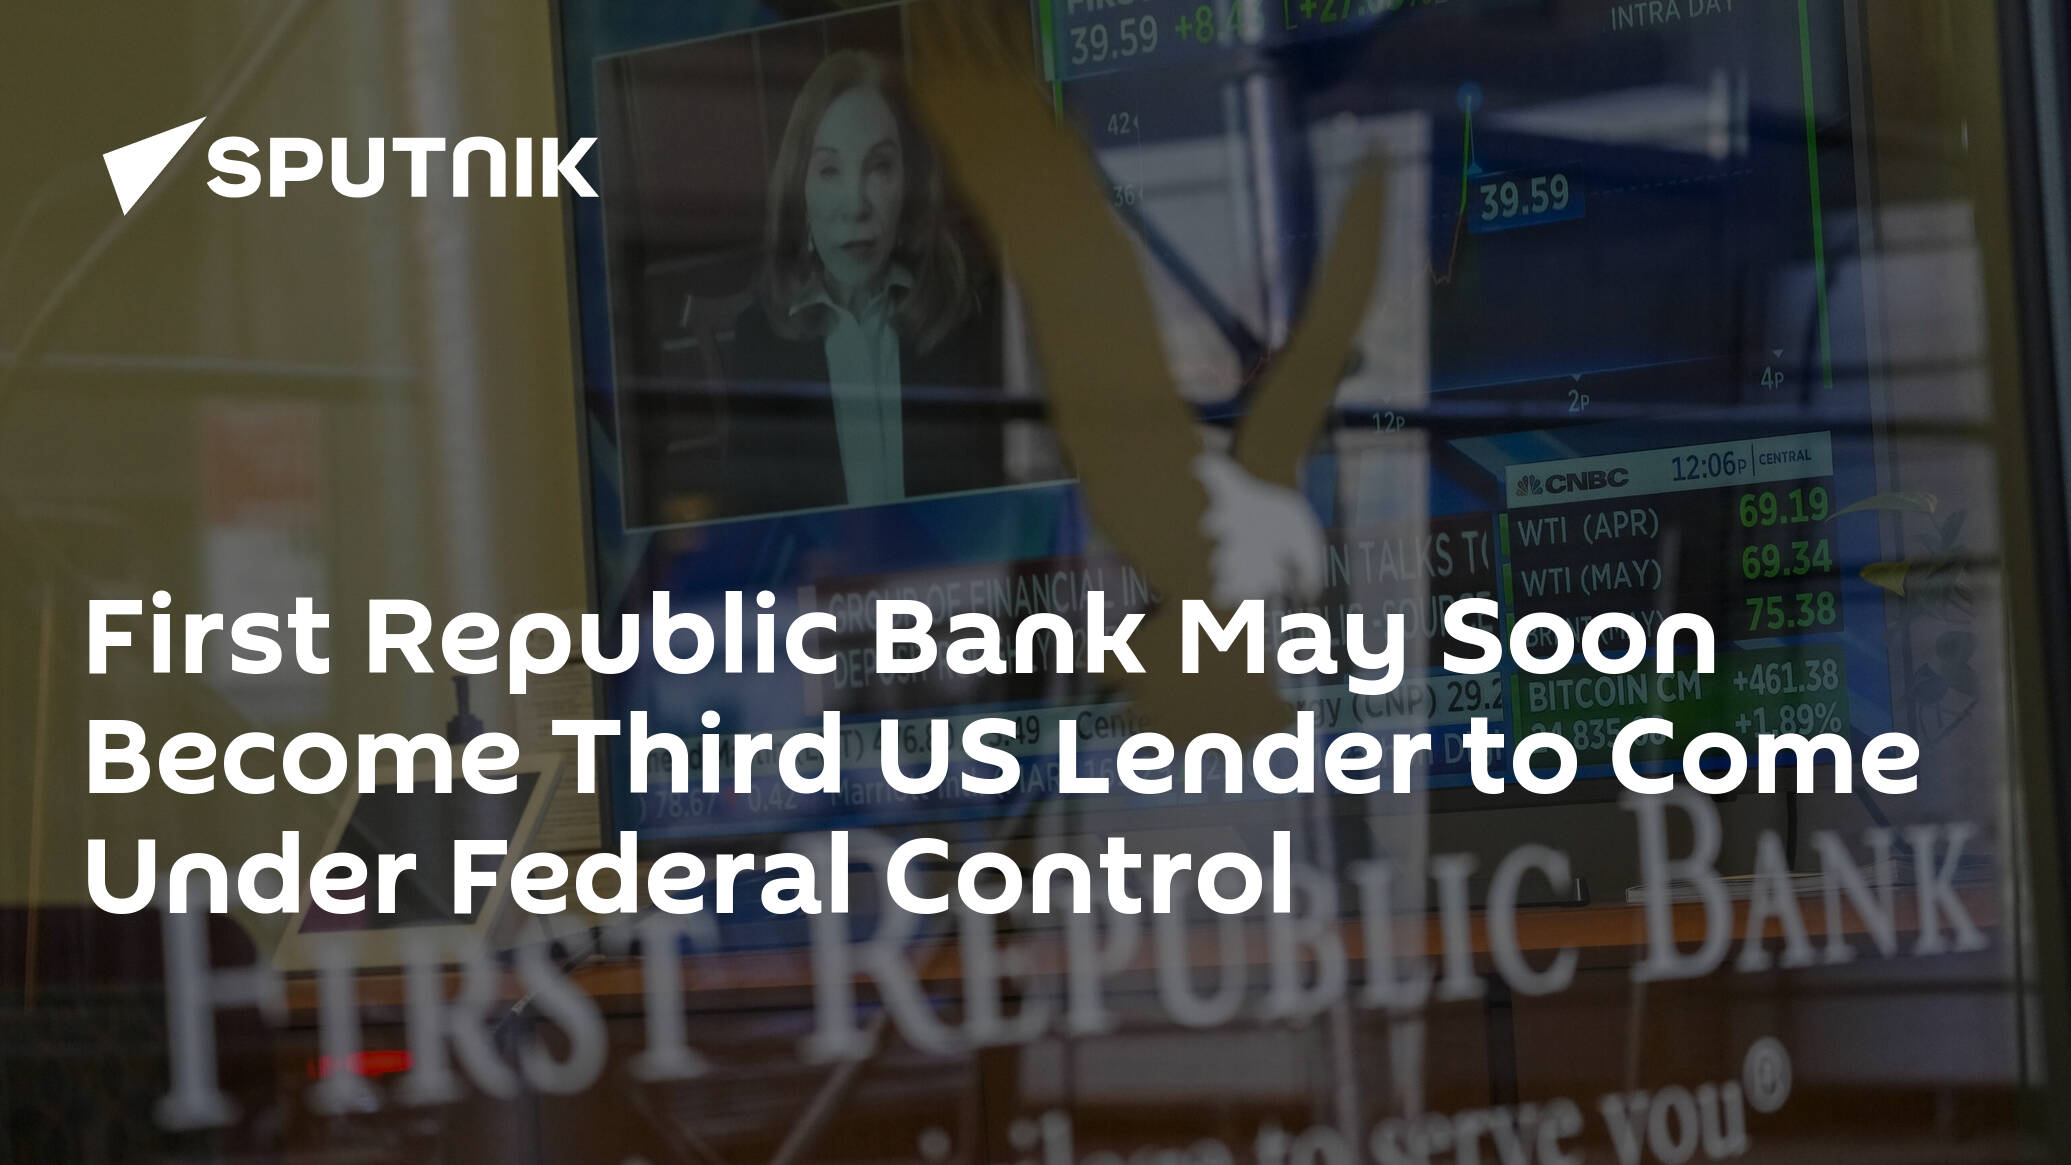 First Republic Bank May Soon Become Third US Lender to Come Under Federal Control